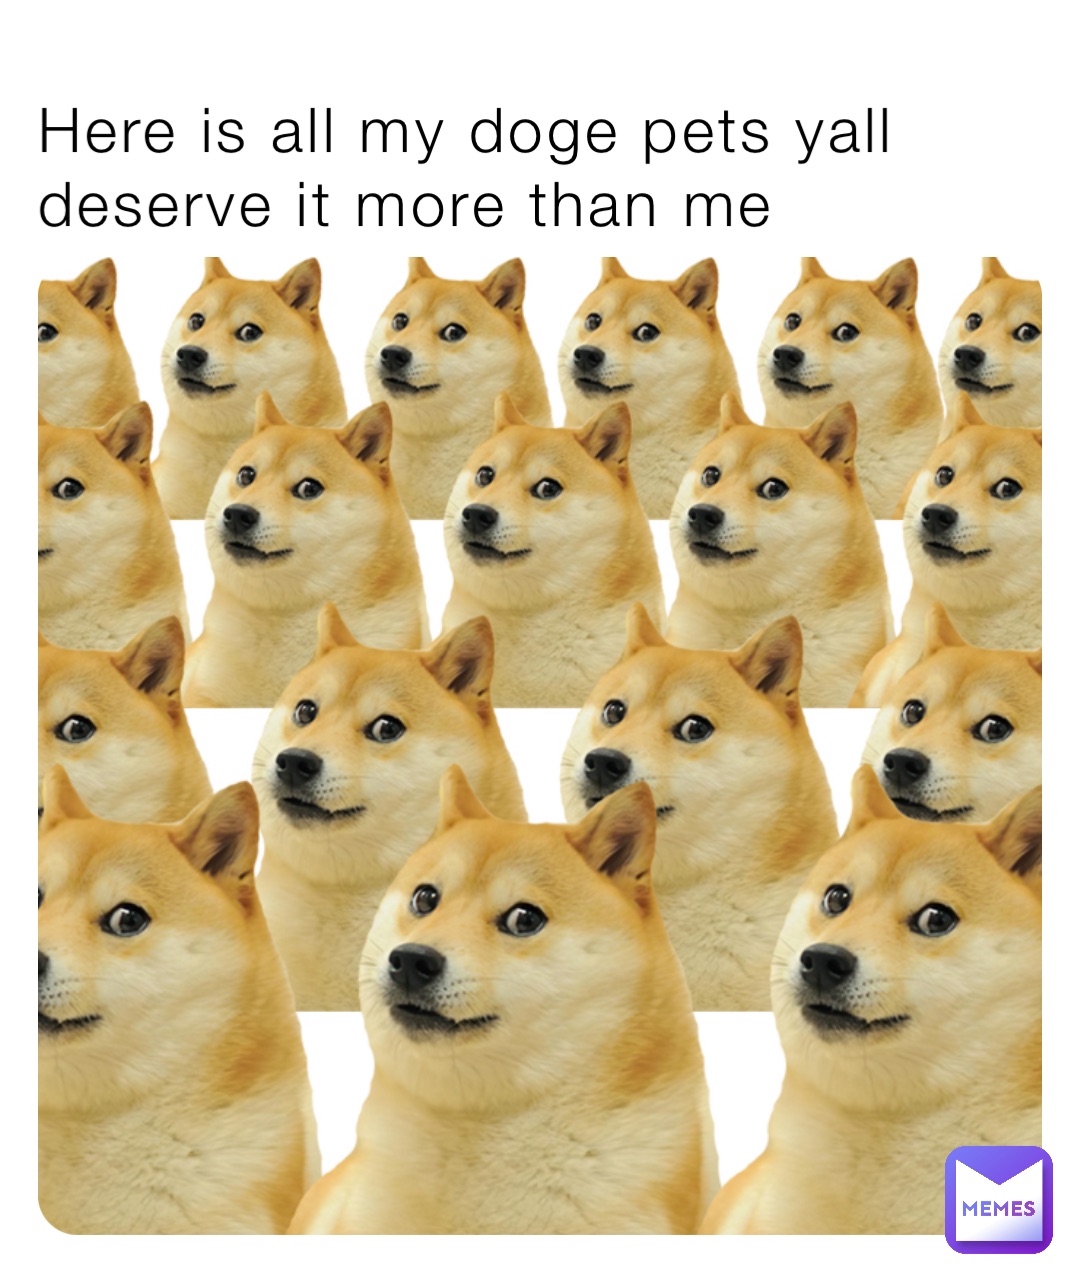 Here is all my doge pets yall deserve it more than me